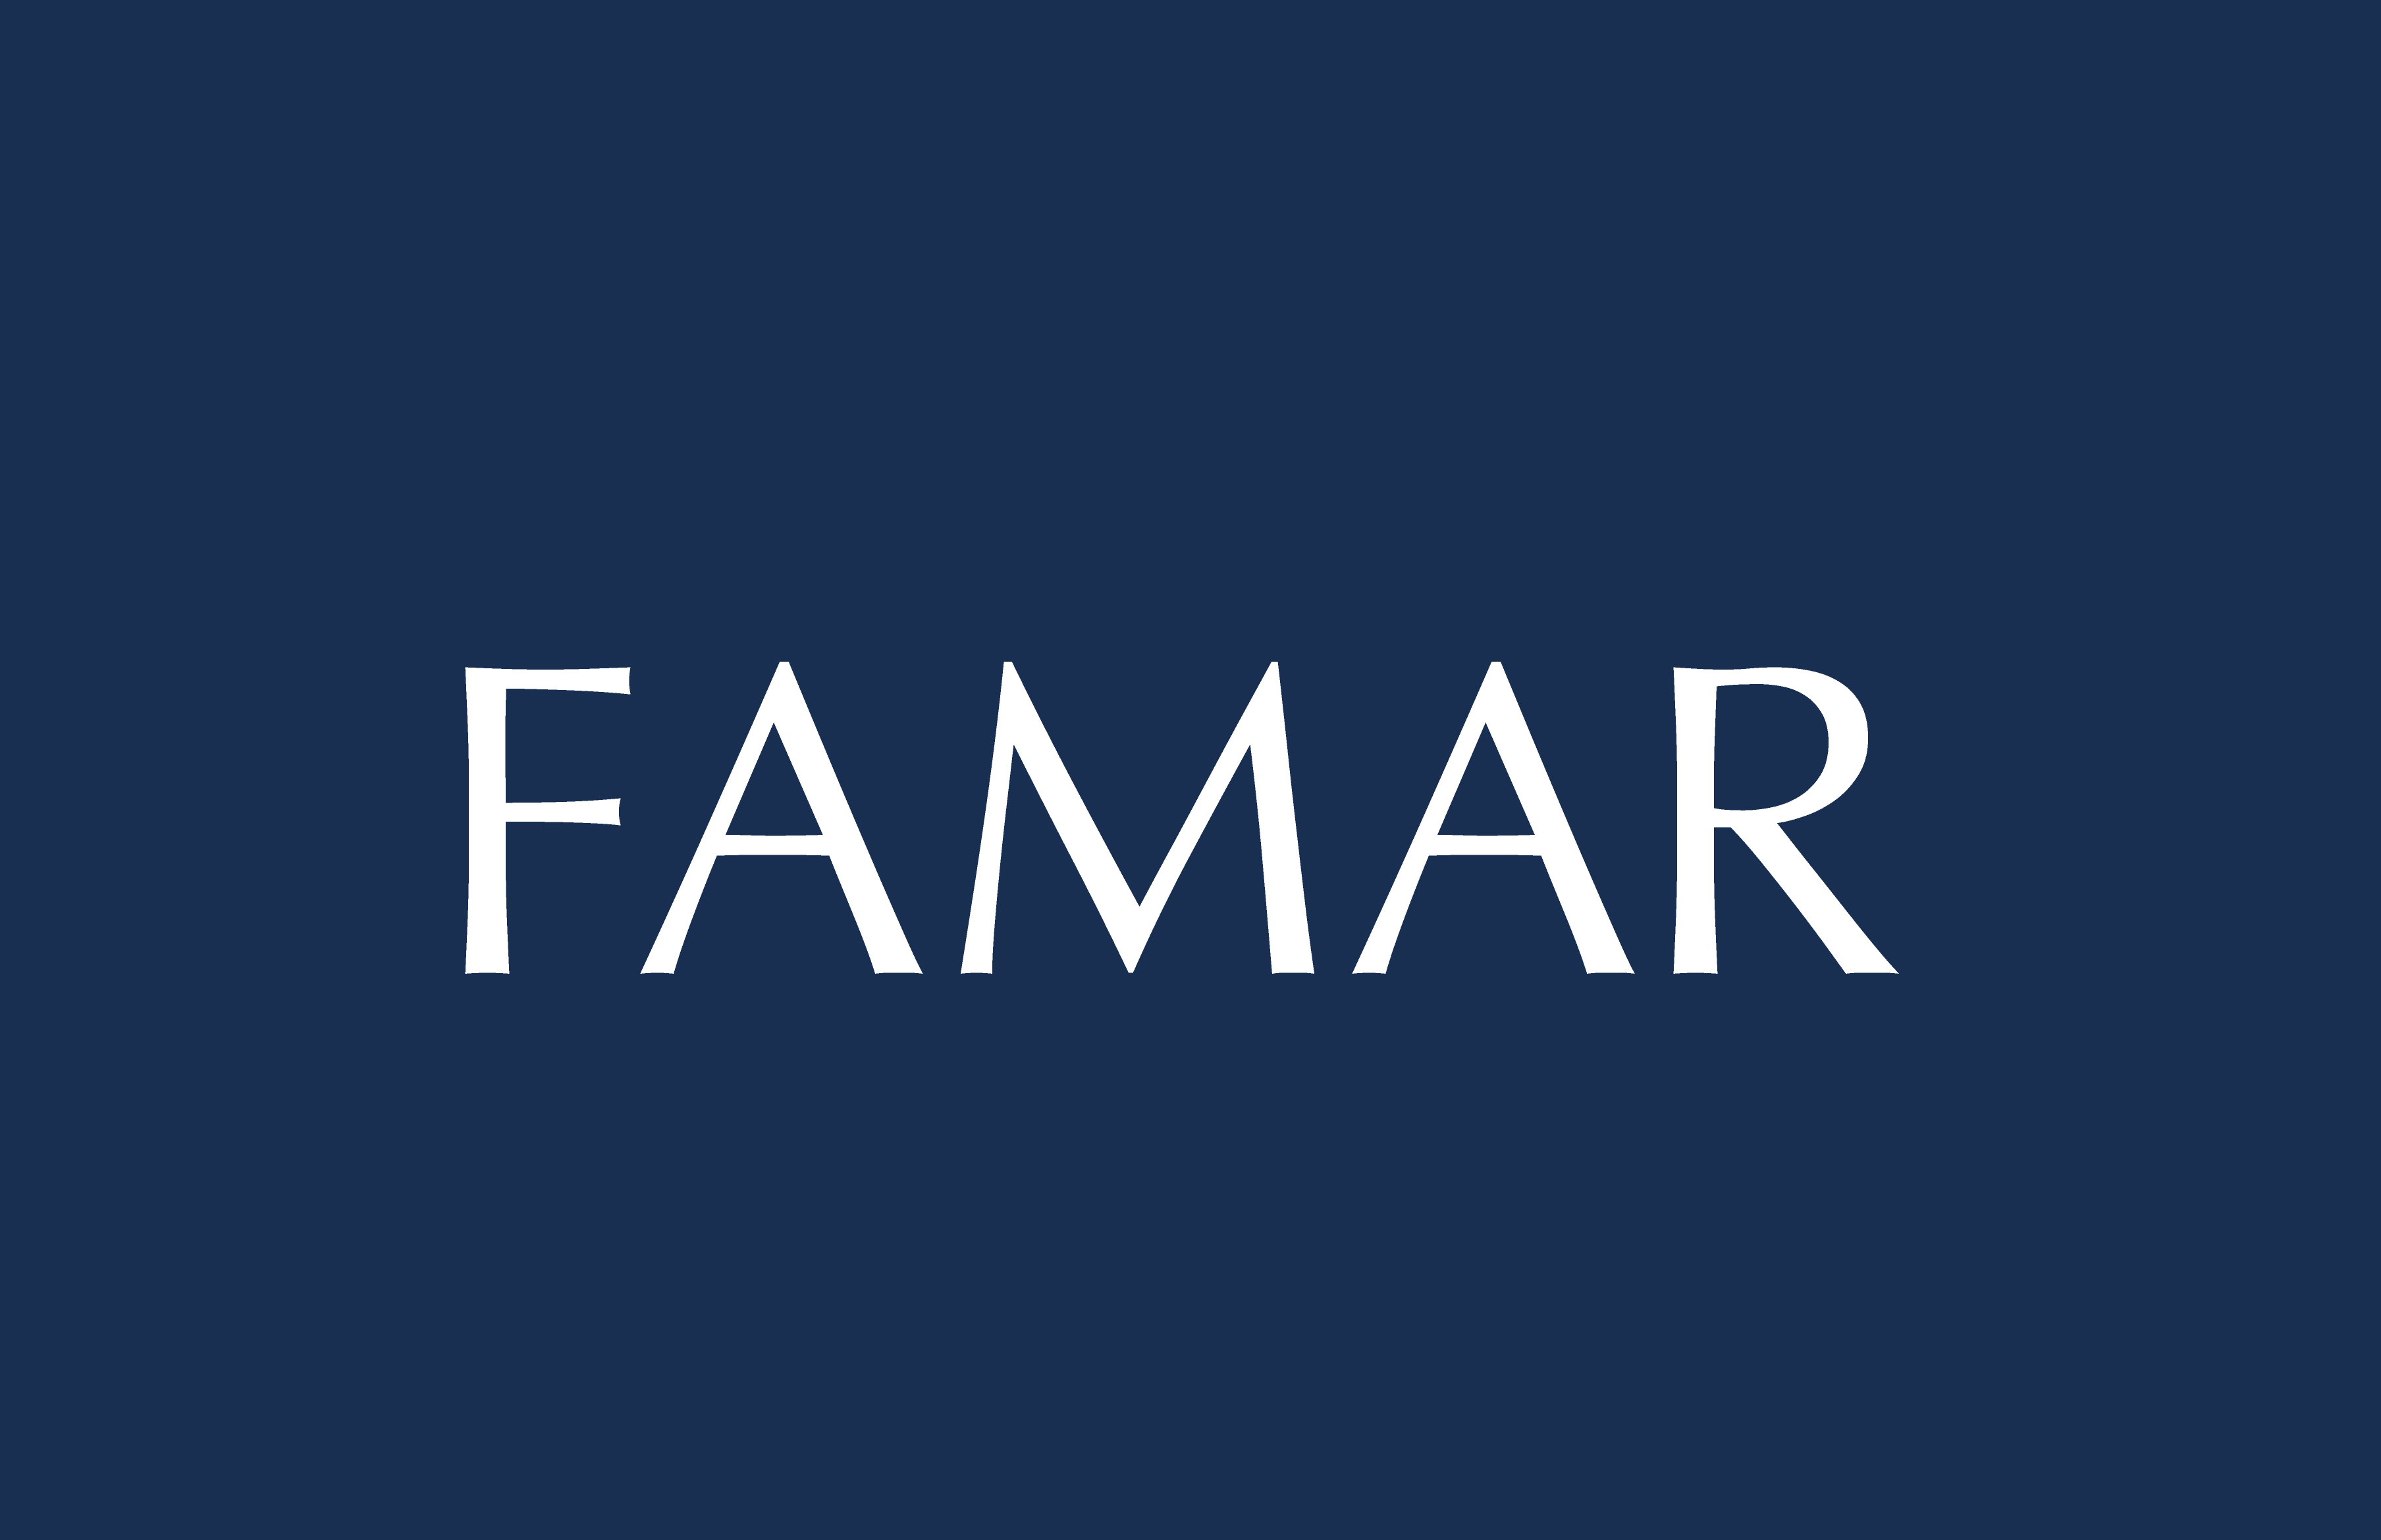 FAMAR ANONYMOUS INDUSTRIAL COMPANY OF PHARMACEUTICALS AND COSMETICS